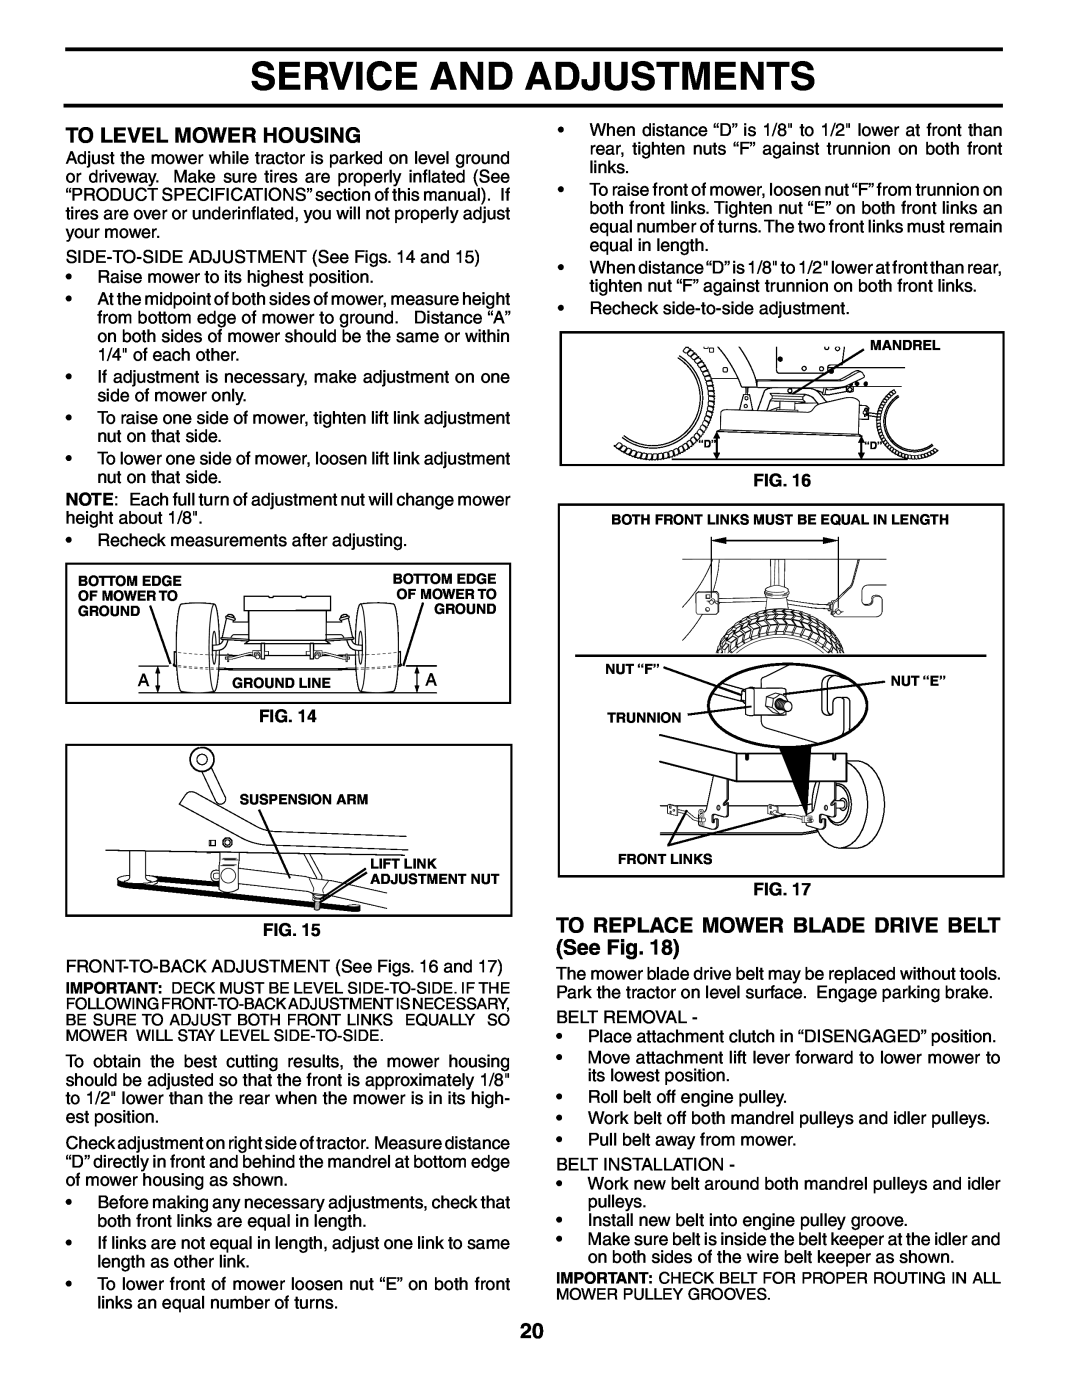 Poulan 96012004400, 401152 manual To Level Mower Housing, TO REPLACE MOWER BLADE DRIVE BELT See Fig, Service And Adjustments 